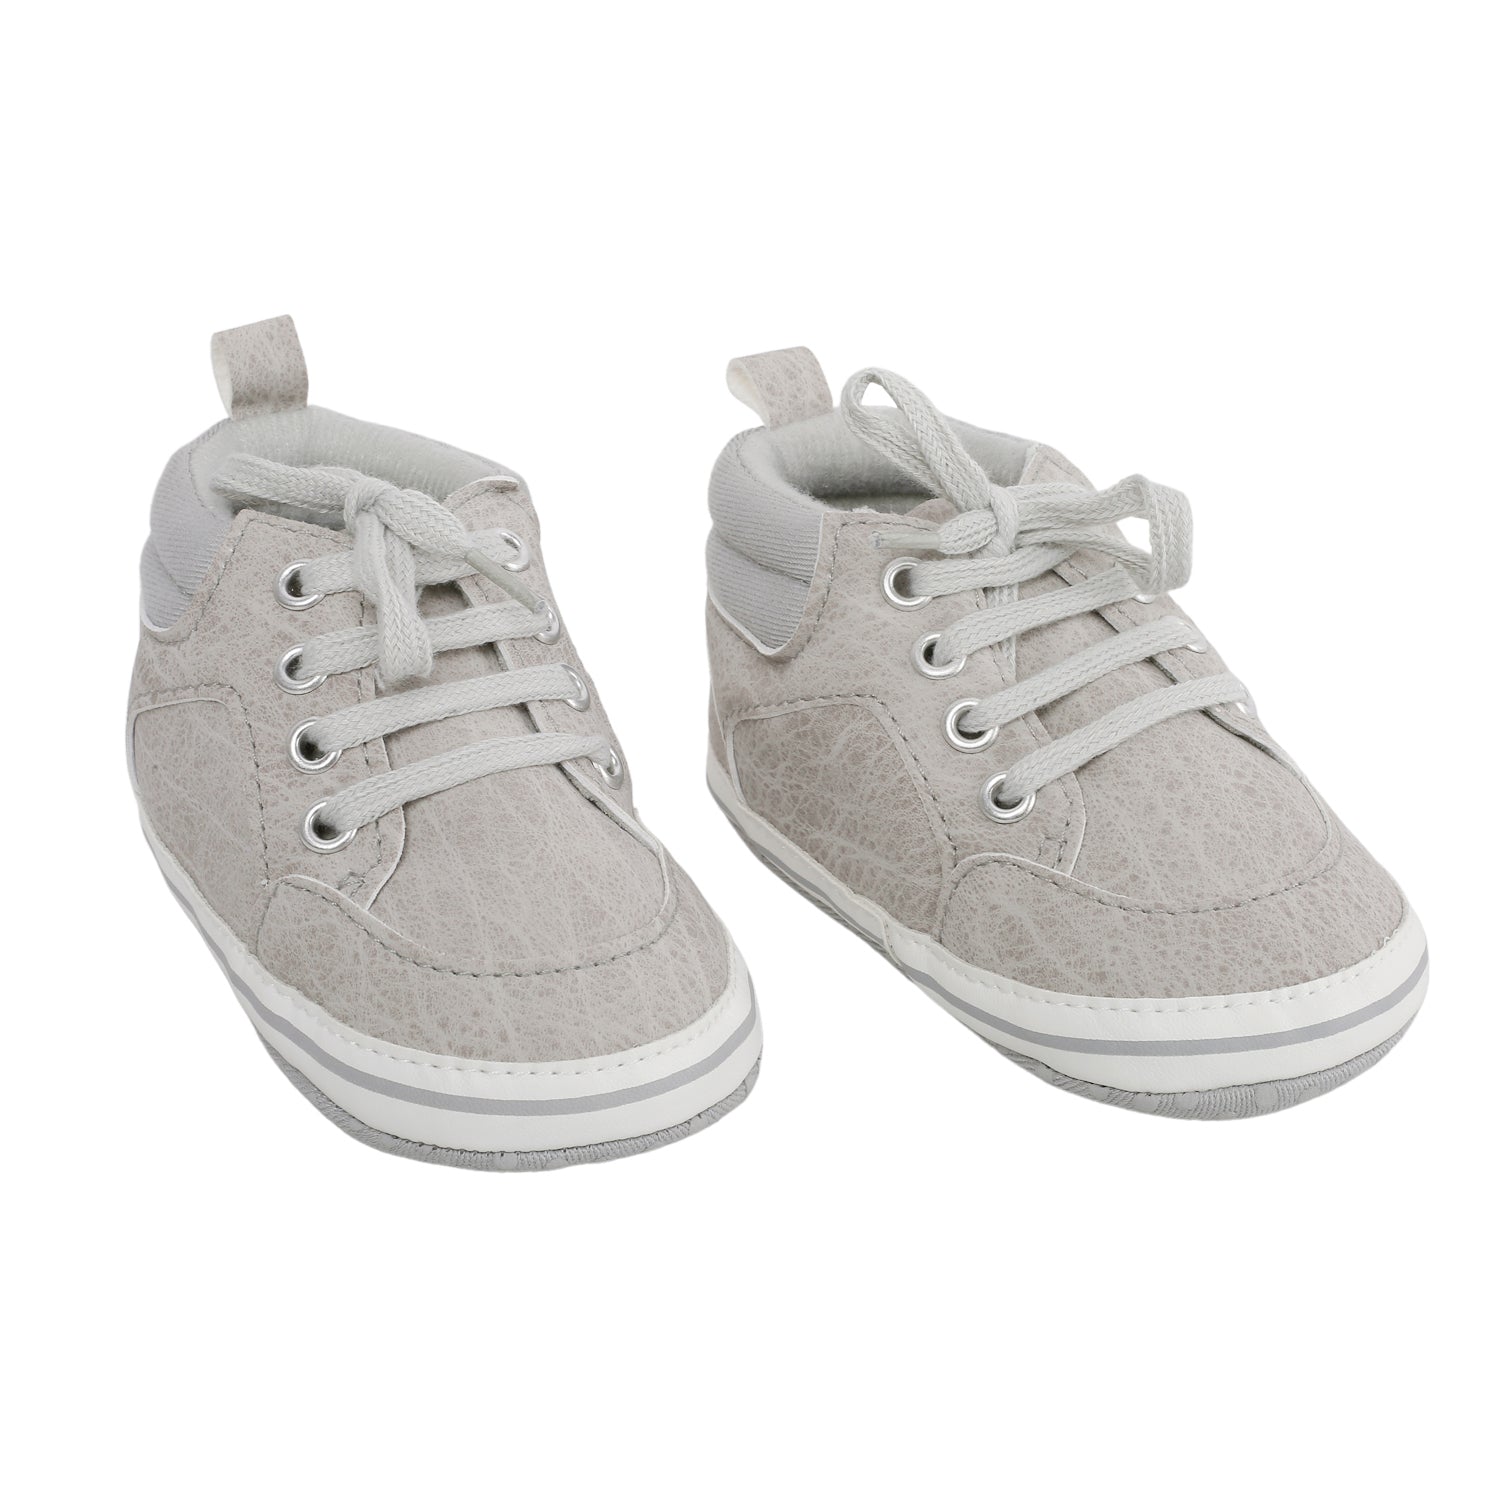 Baby Moo Textured Grey Lace Up Sneakers - Baby Moo